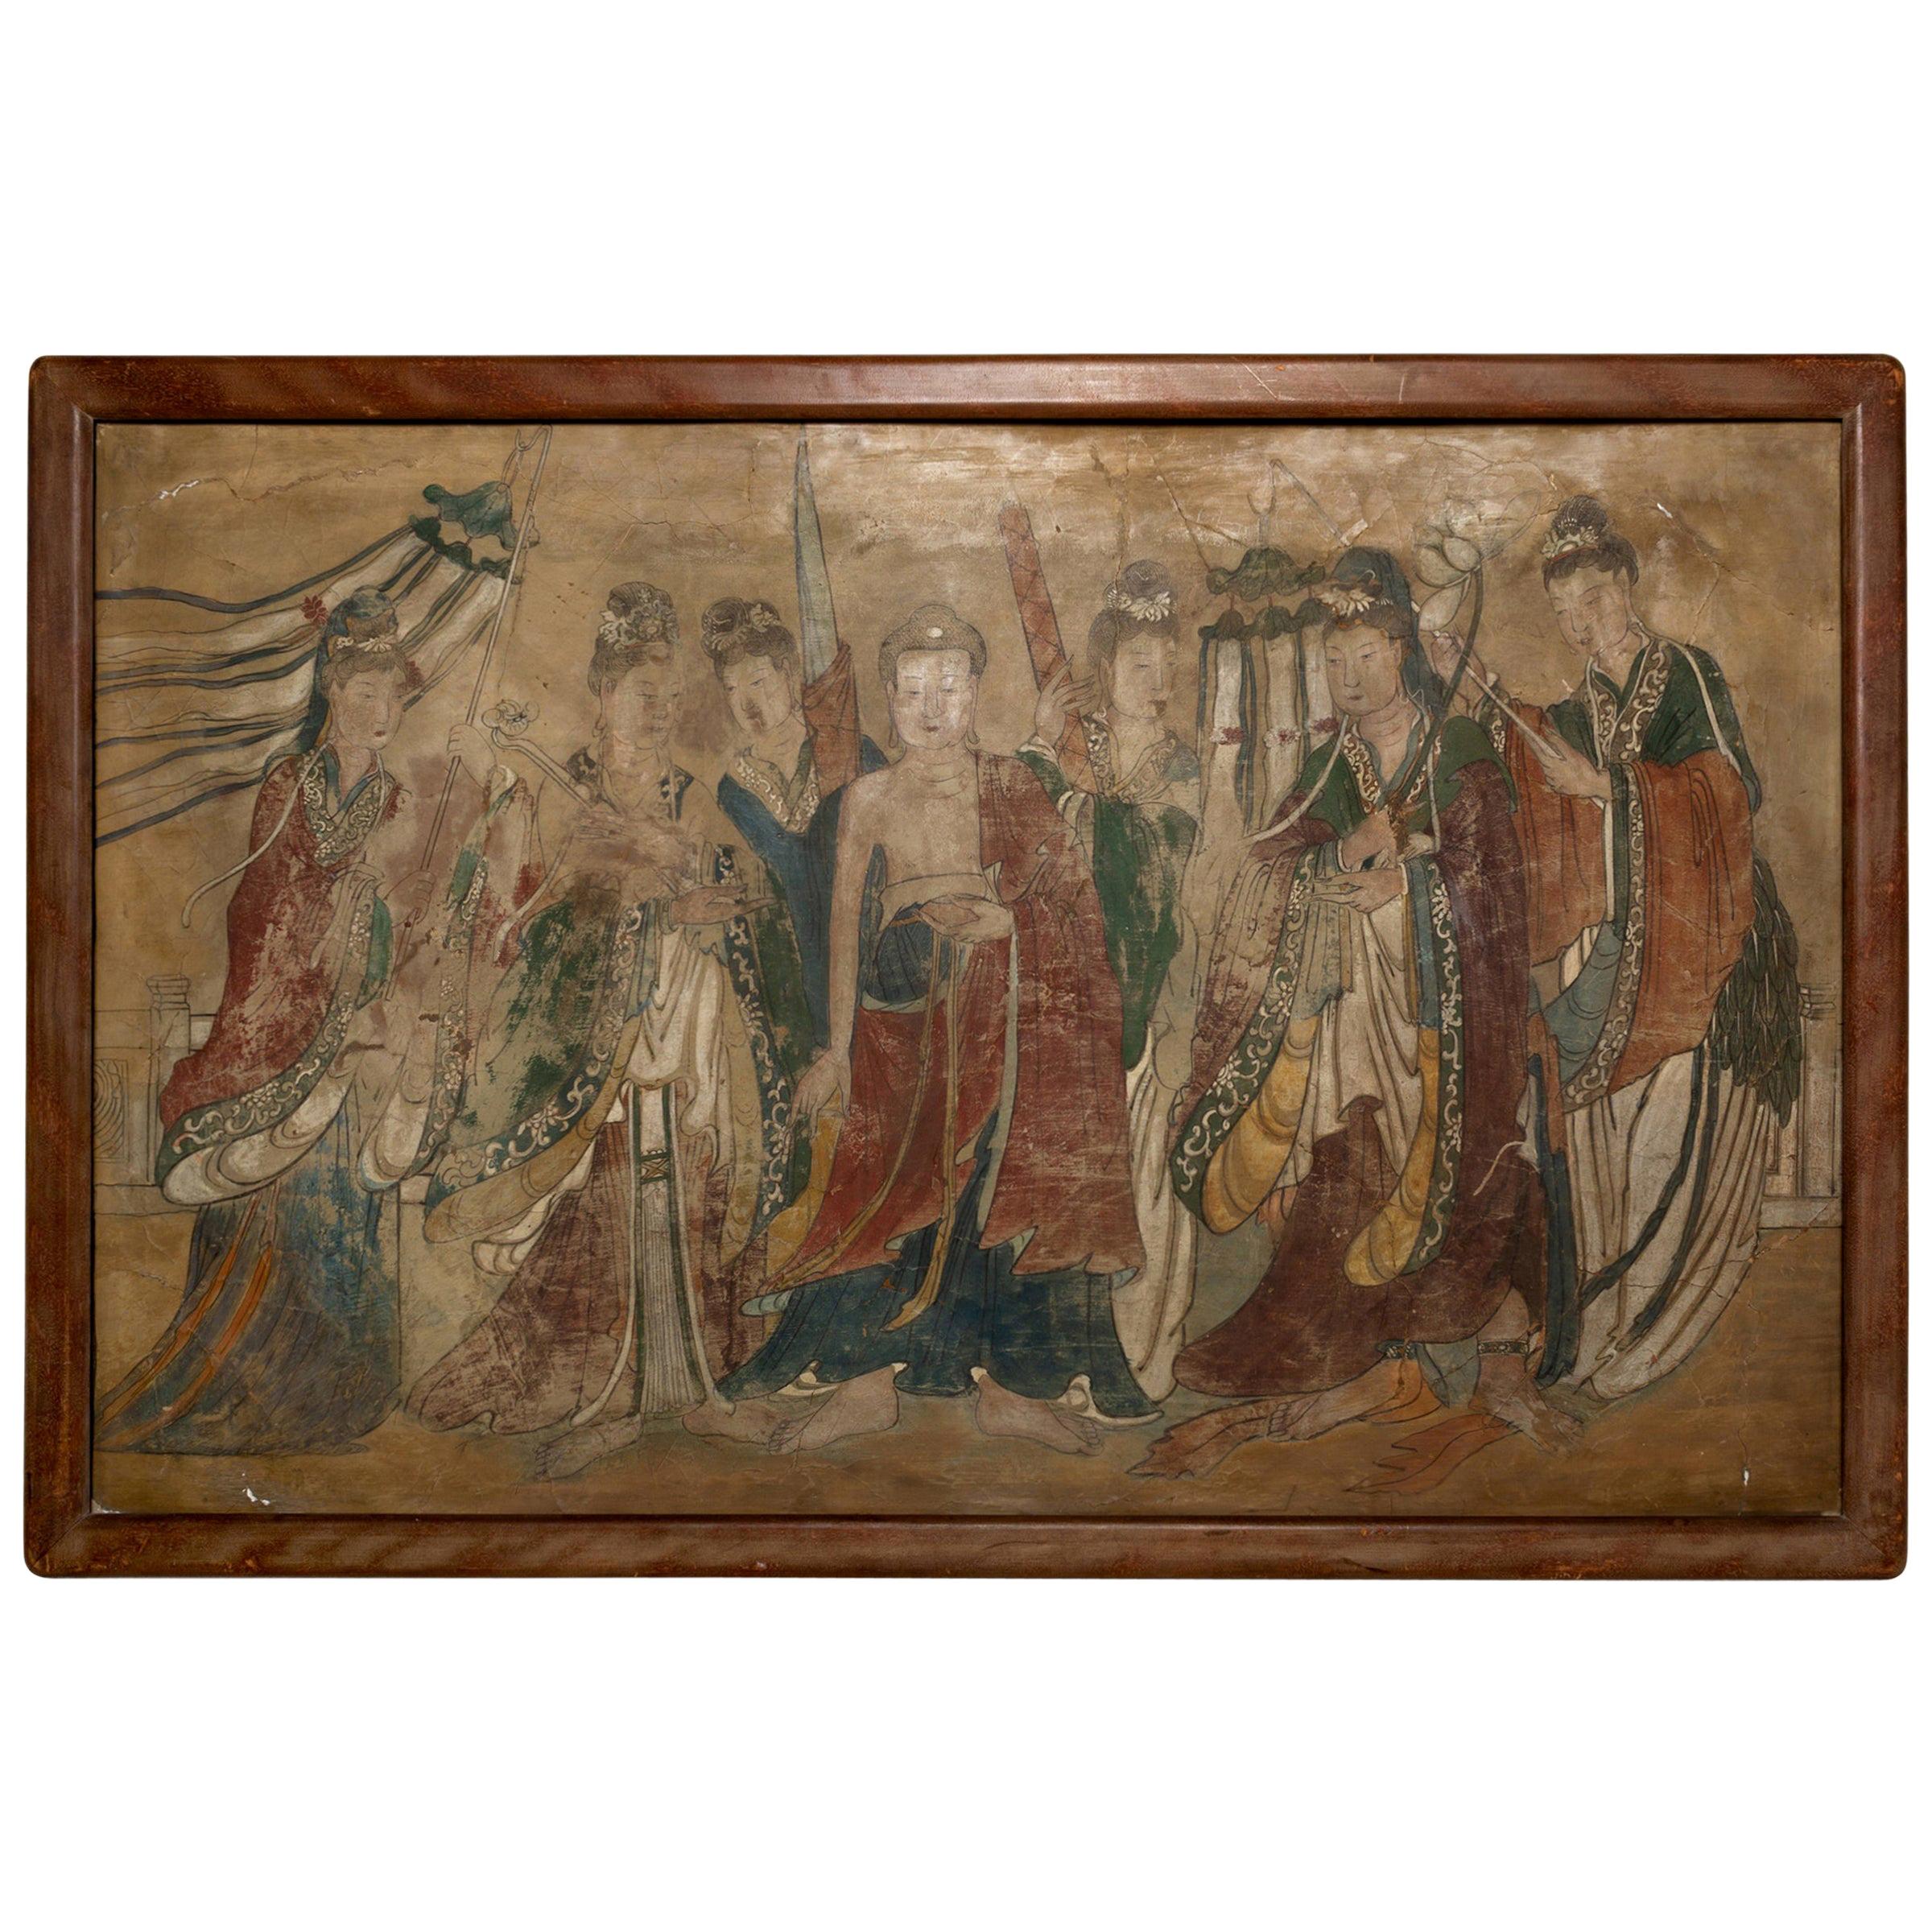 Ming Dynasty Chinese Mural Painting of Buddha Flanked by Attendants